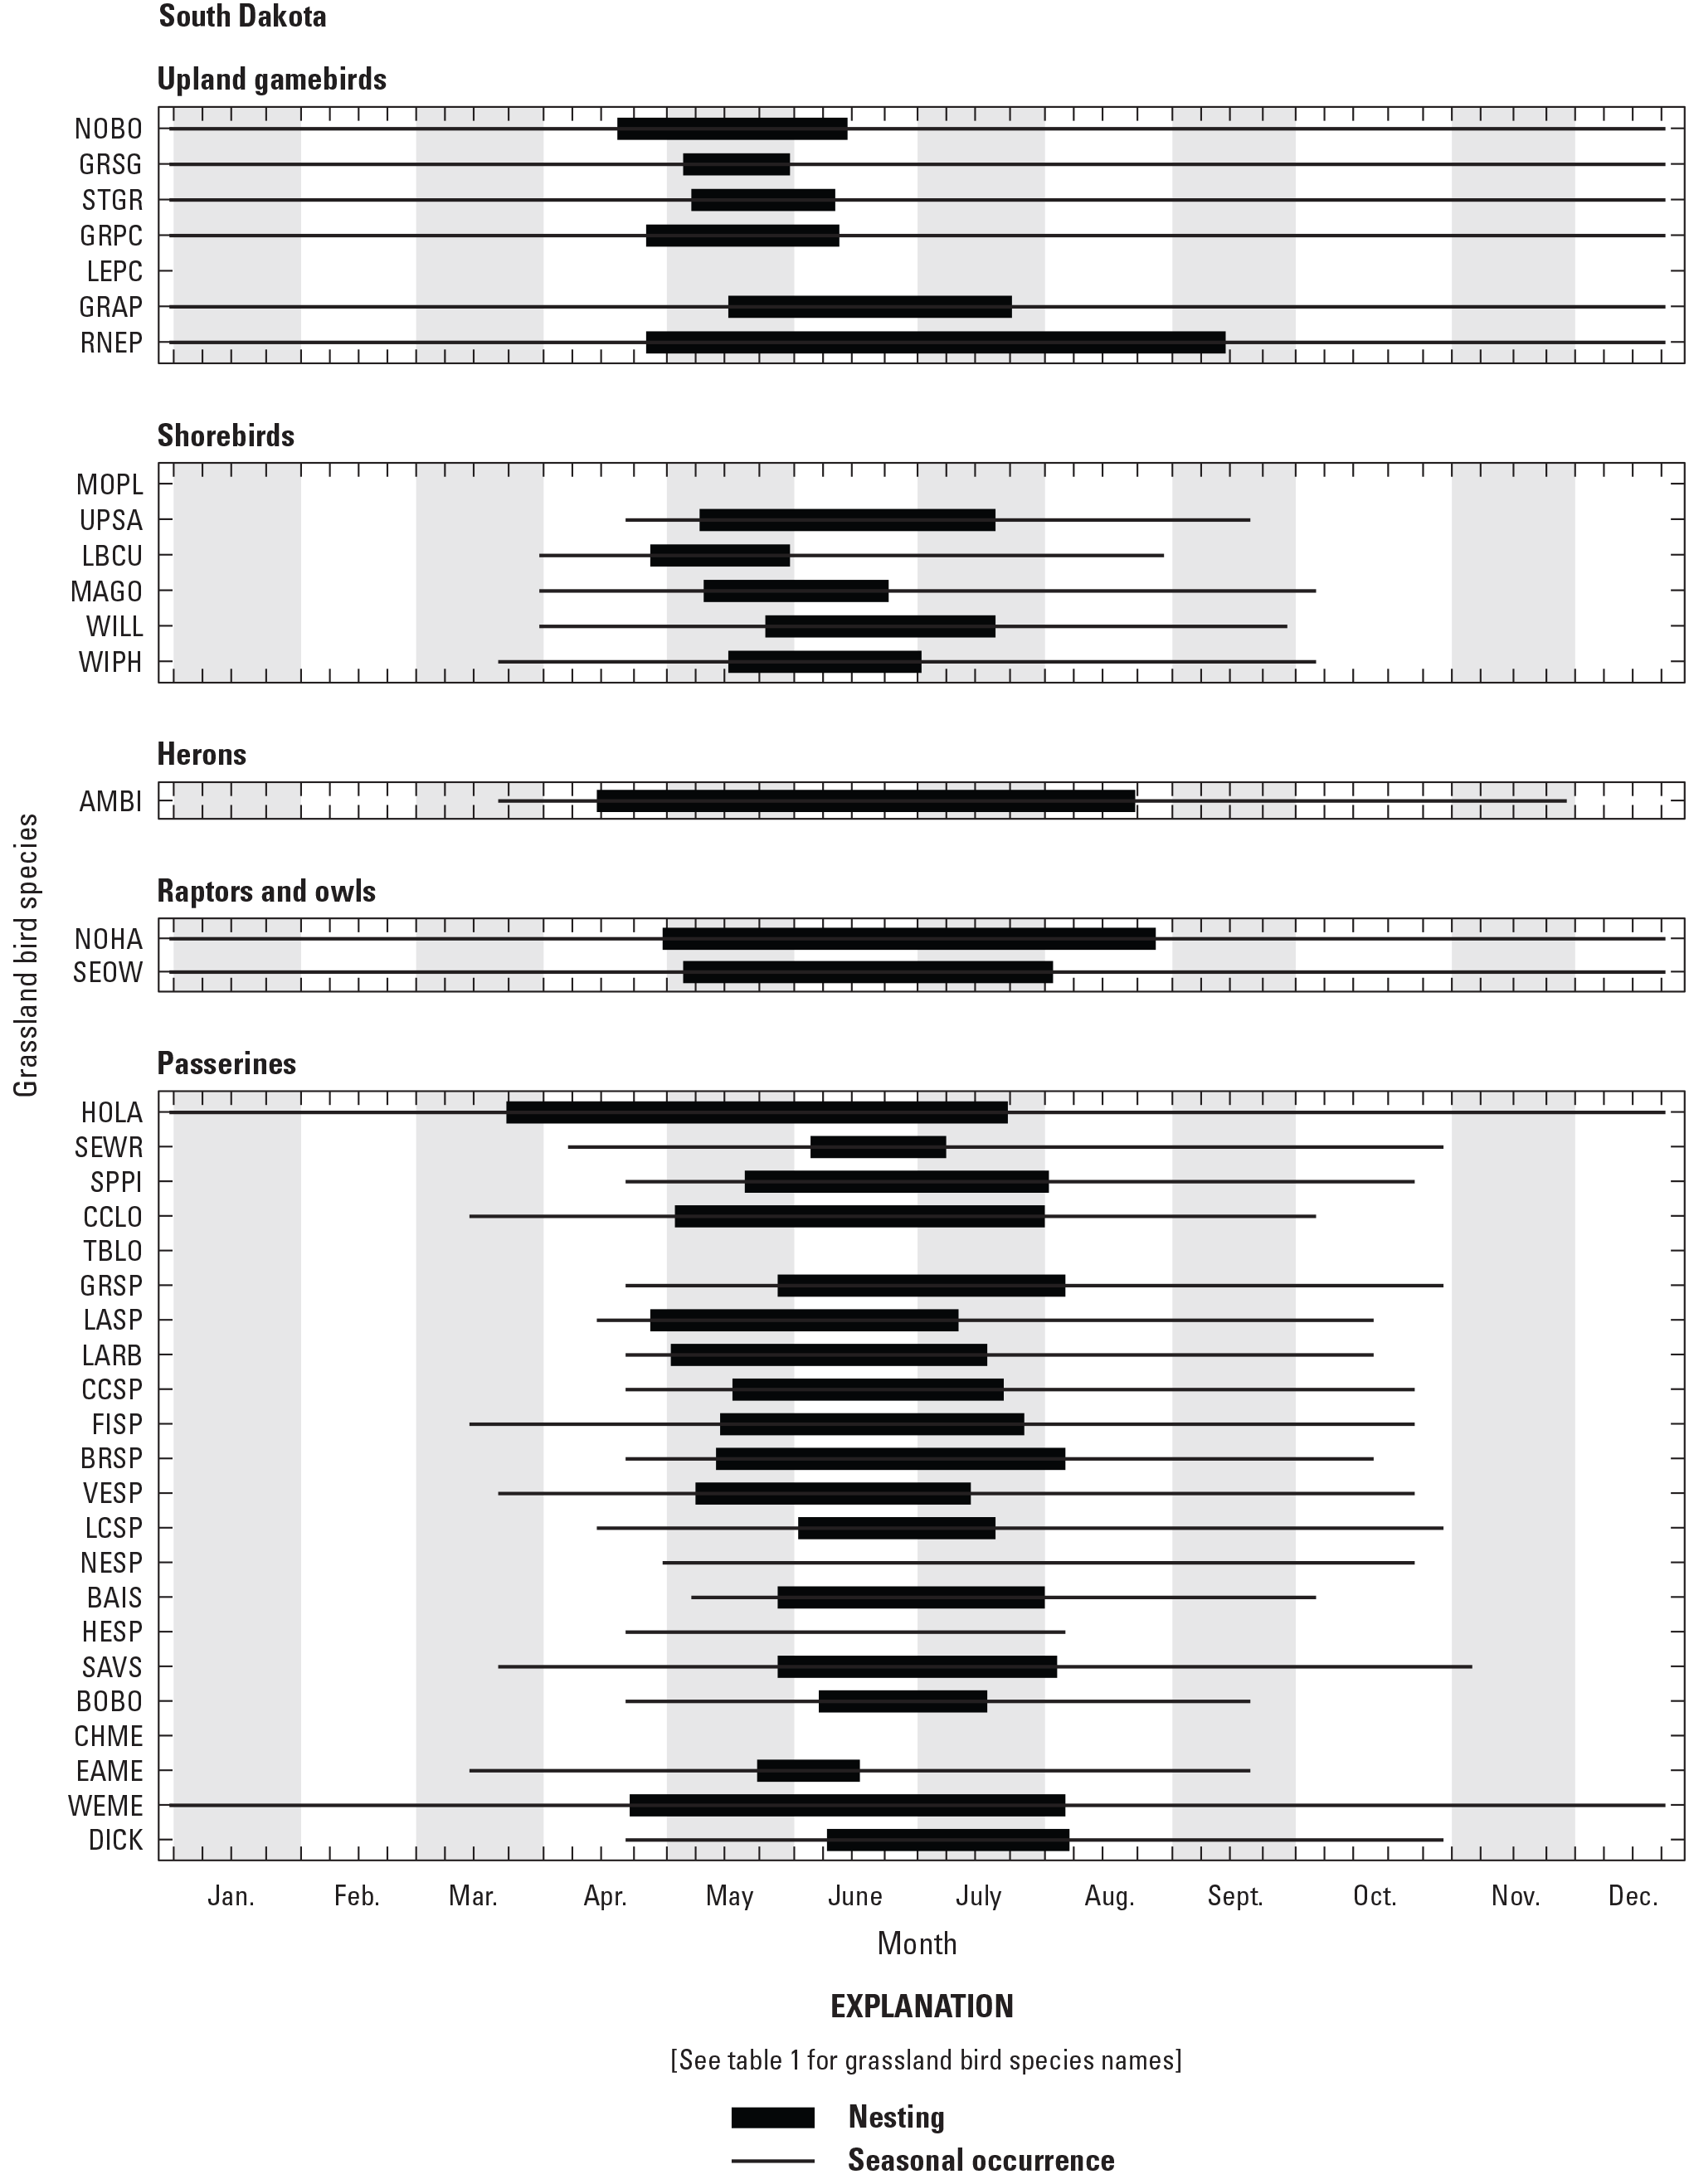 Figure showing seasonal occurrence and nesting phenology for 38 grassland bird species
               in South Dakota, United States.